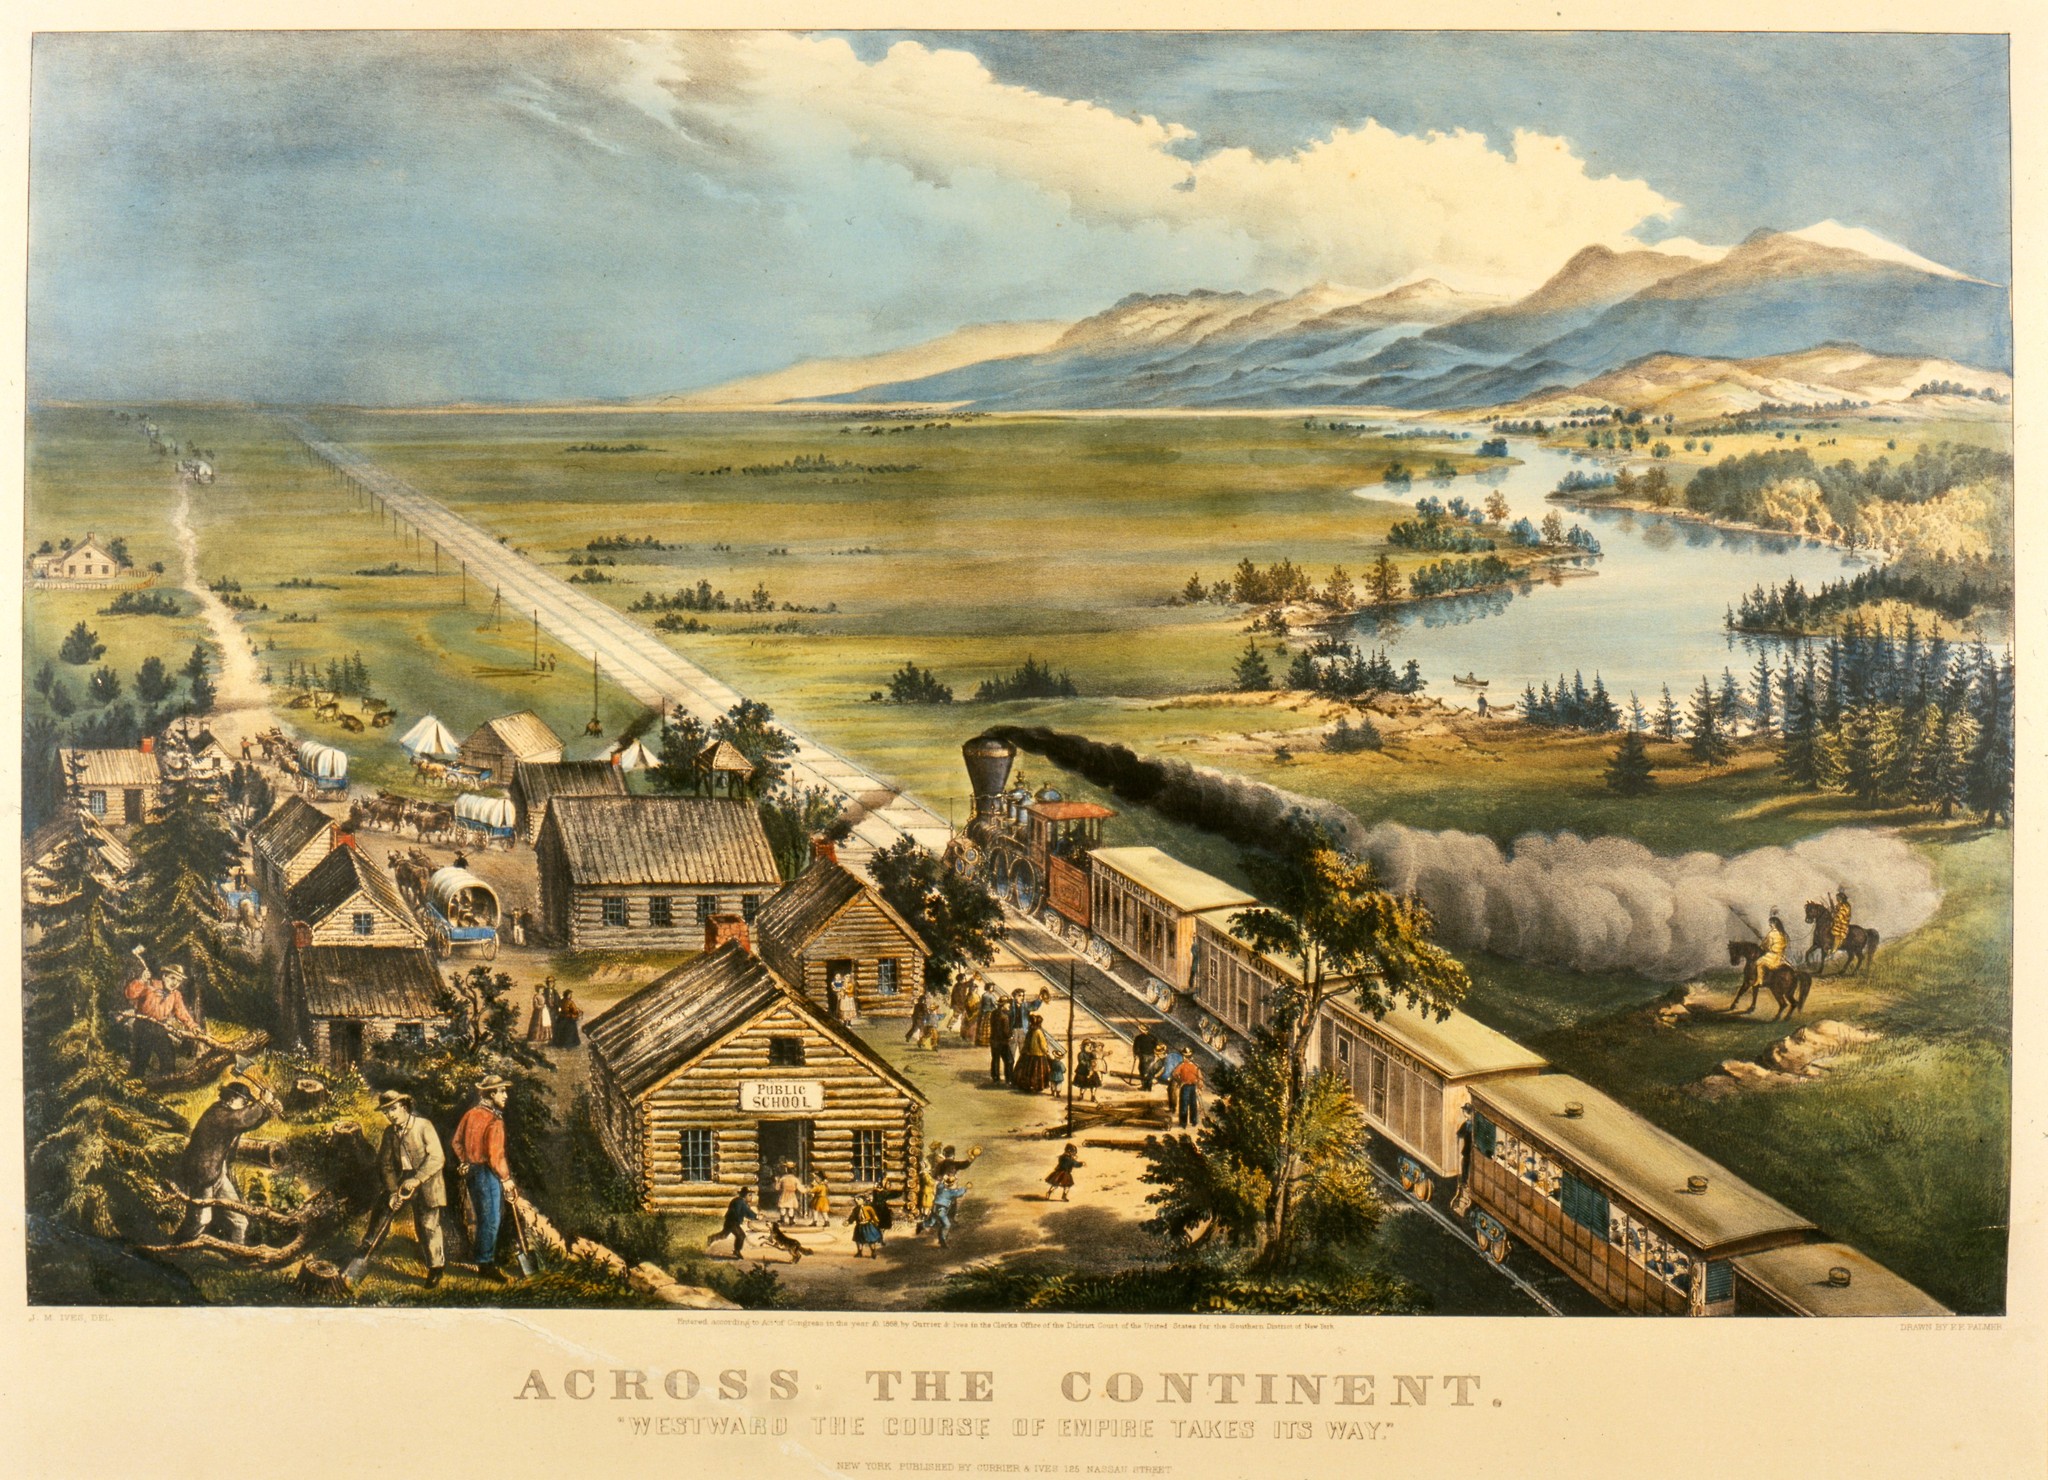 Print of the American West